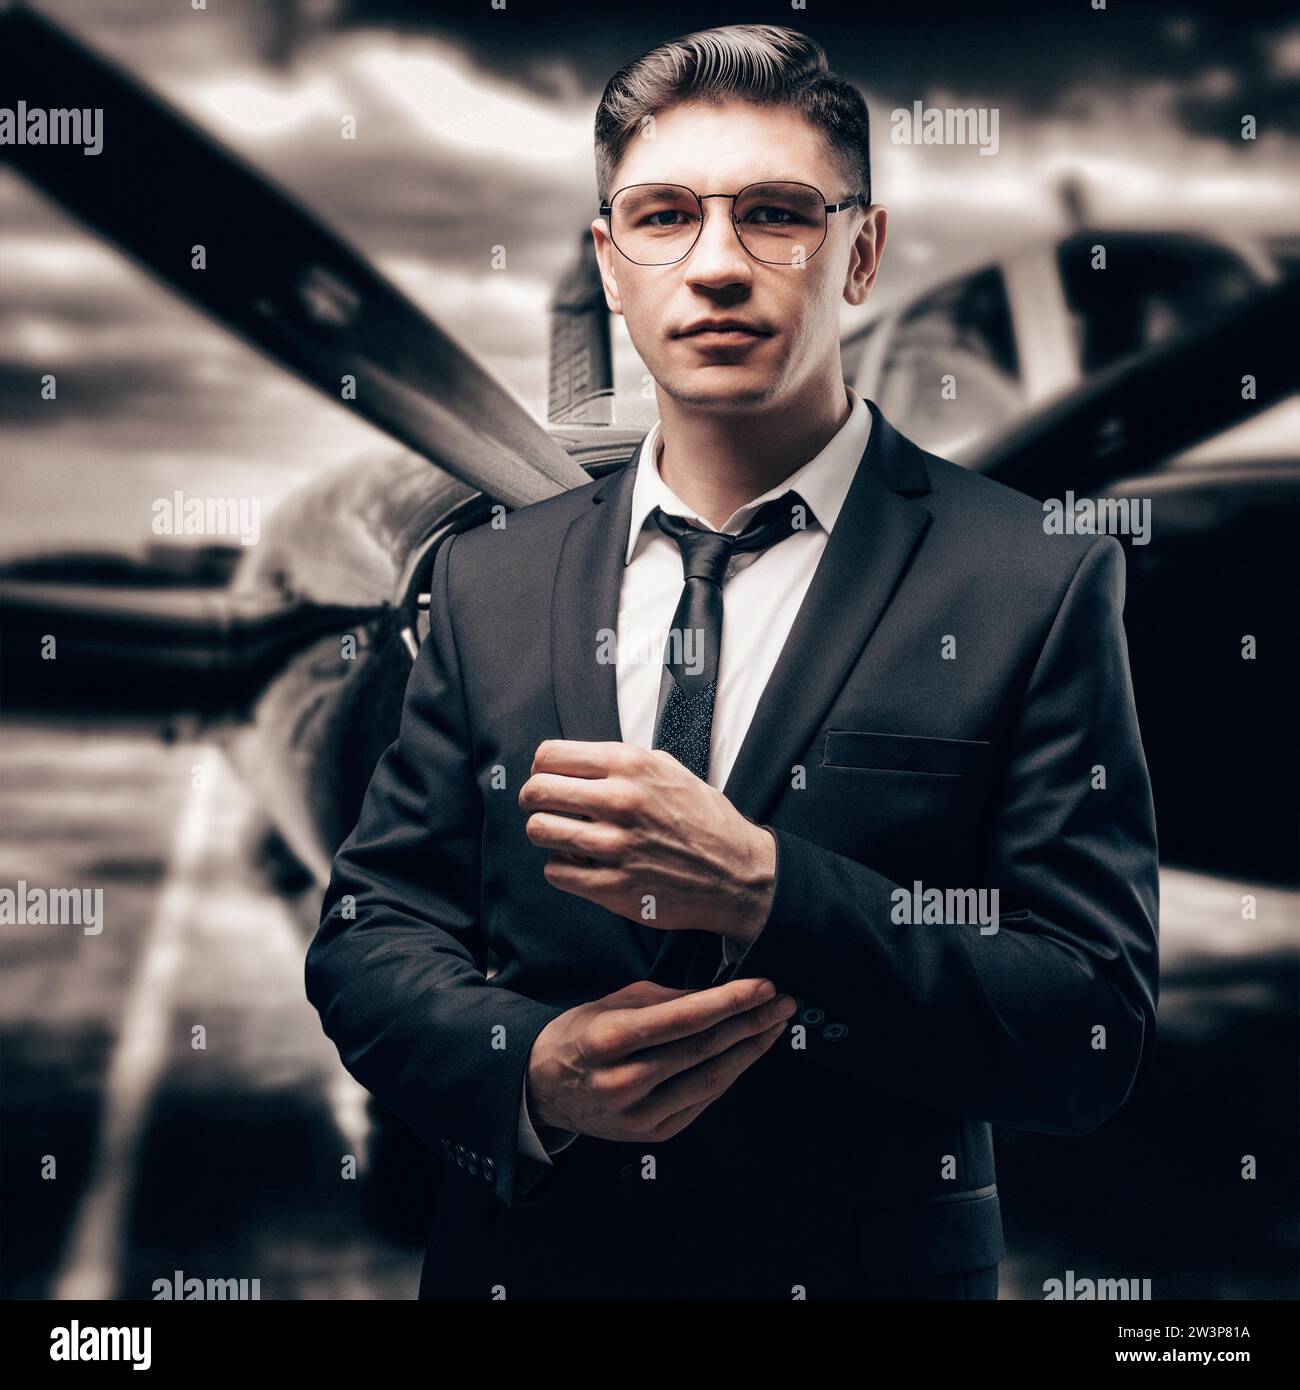 Portrait of a man in a business suit. He stands at the airport amid a sports plane. Aircraft Designer. Private airlines. Mixed media Stock Photo